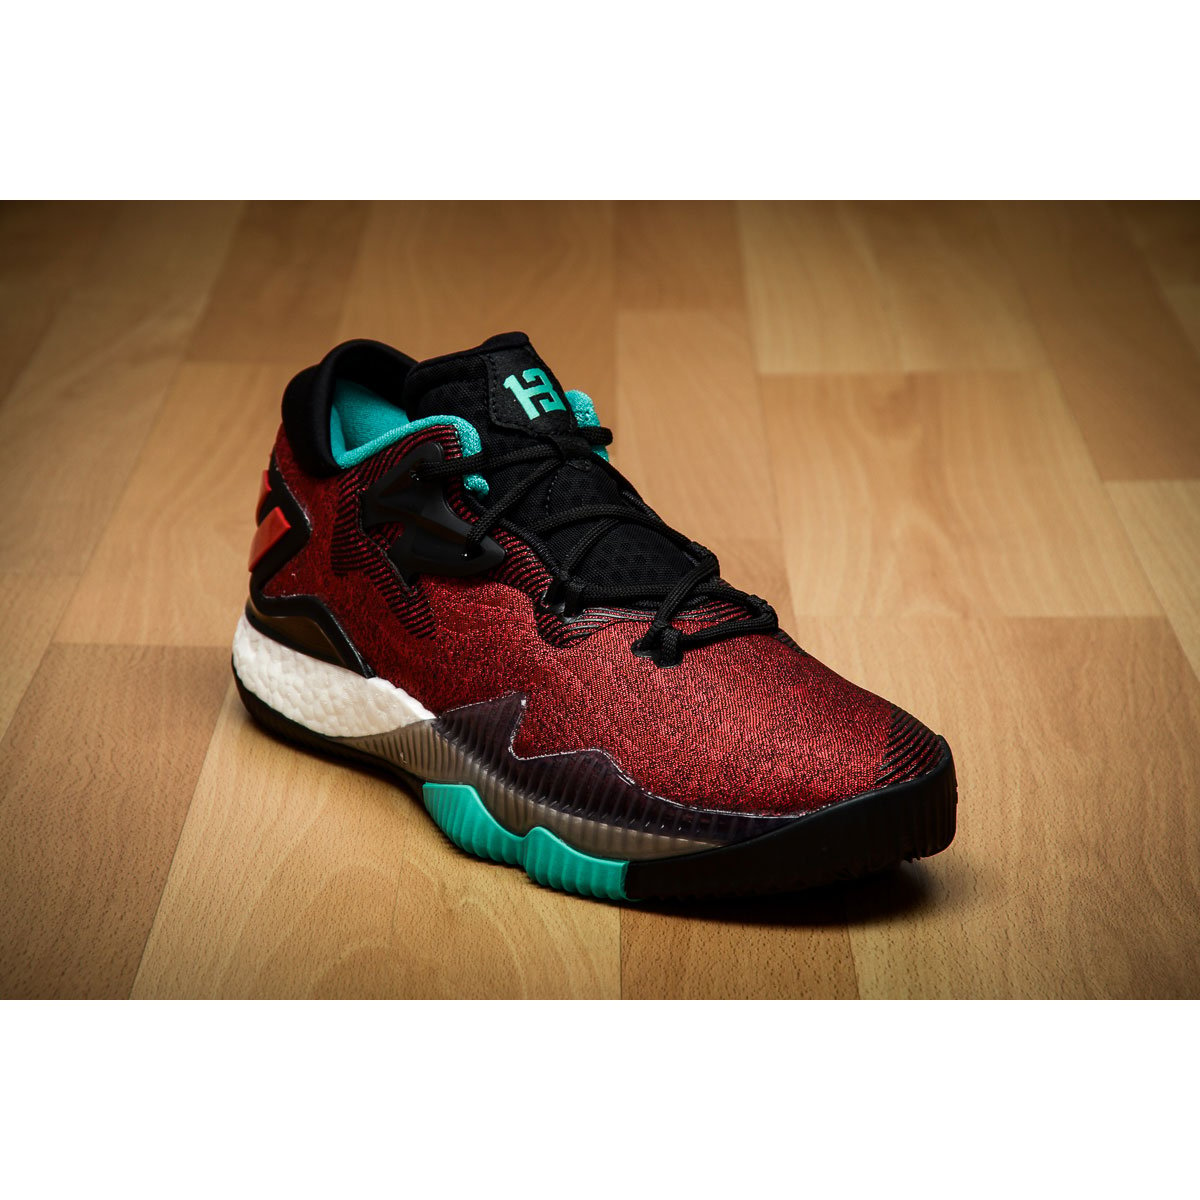 adidas Crazylight Boost Low 2016 red  AQ7761